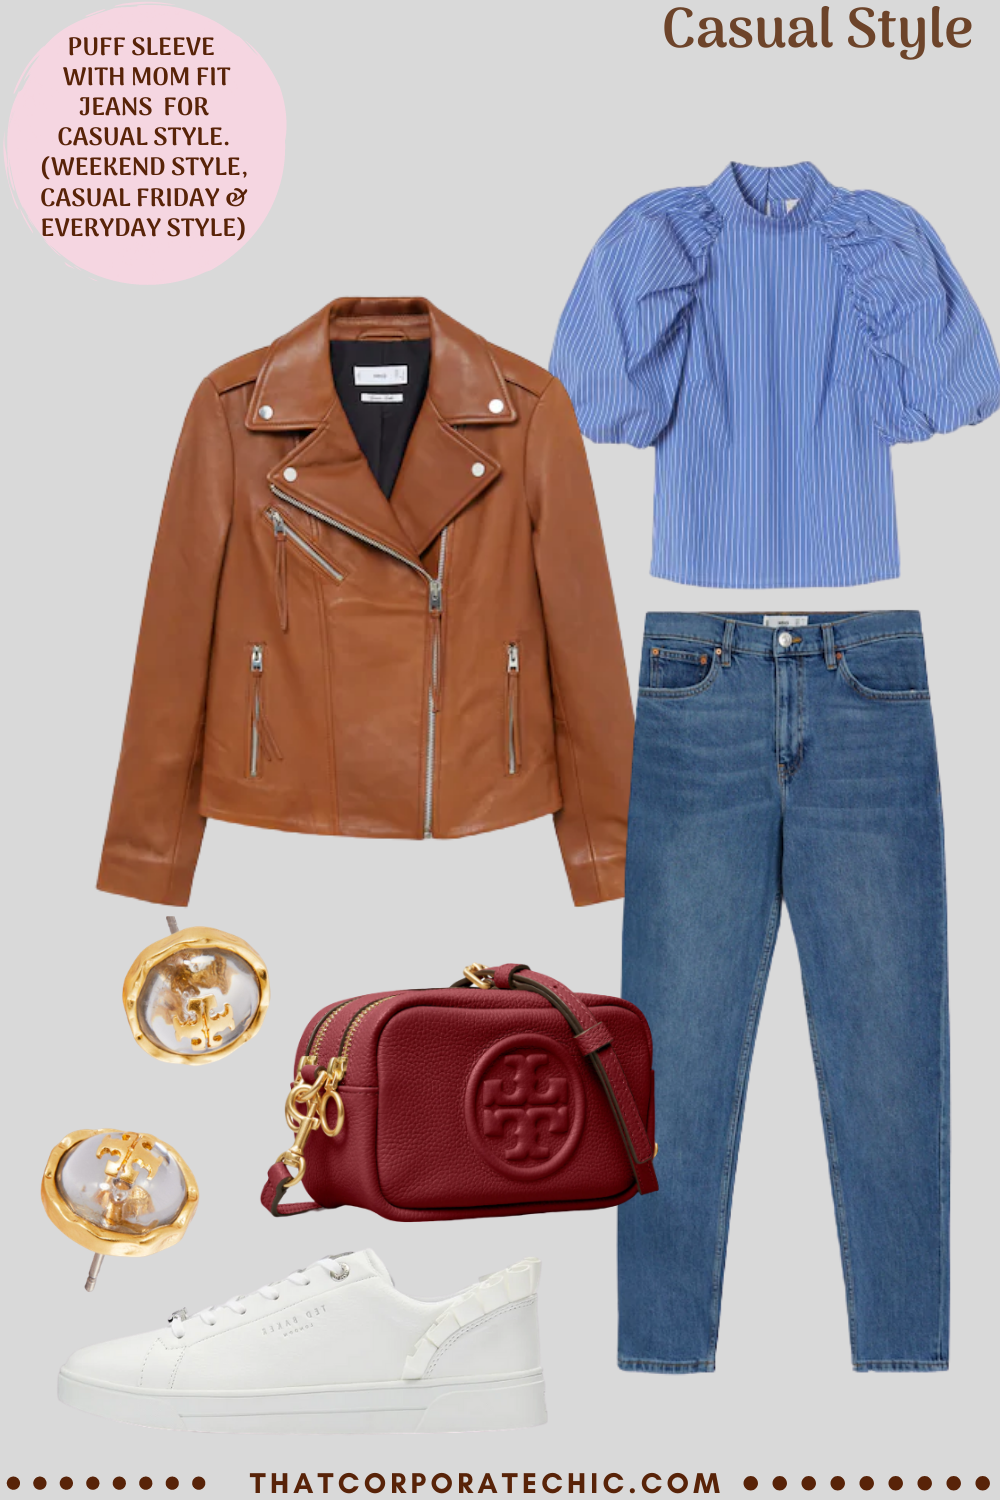 Casual Style: How to Style a Puff sleeve blouse